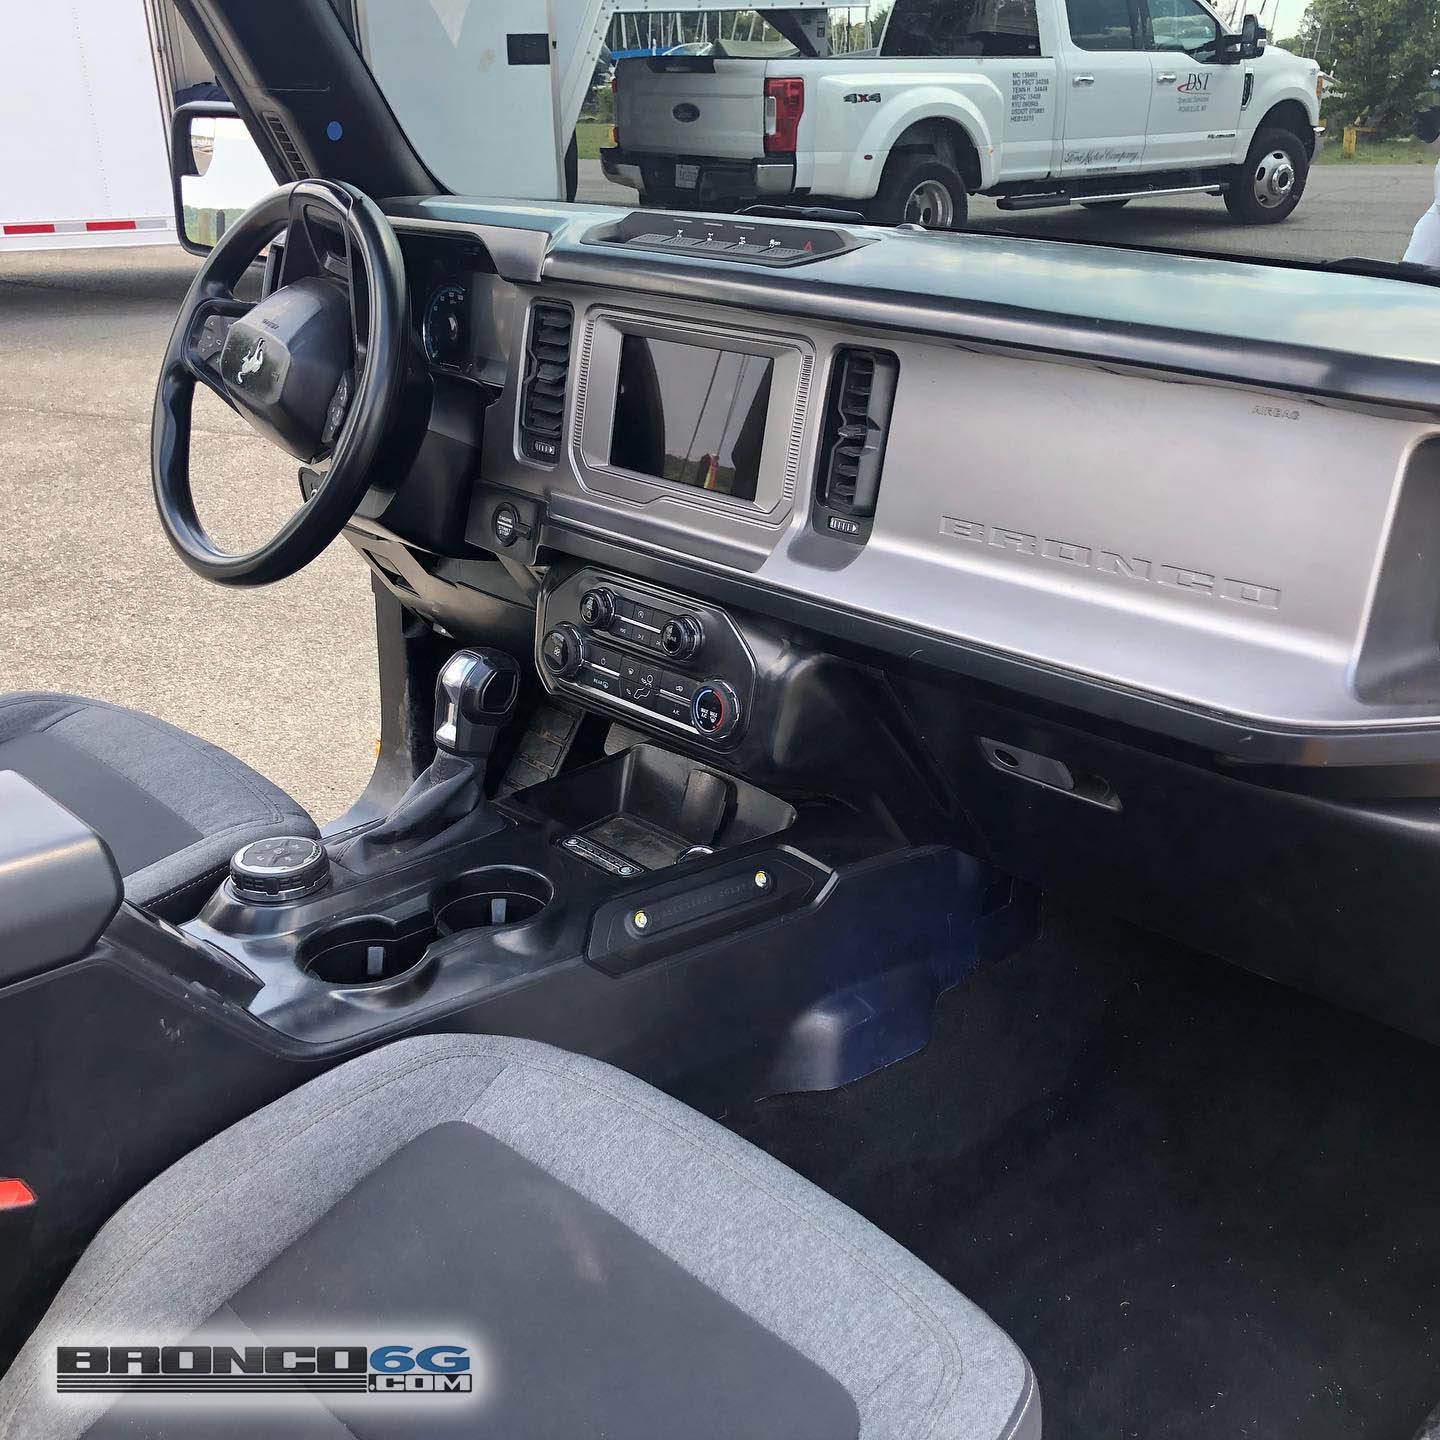 Ford Bronco What's your favorite small detail so far? resources - 2020-07-15T145552.189